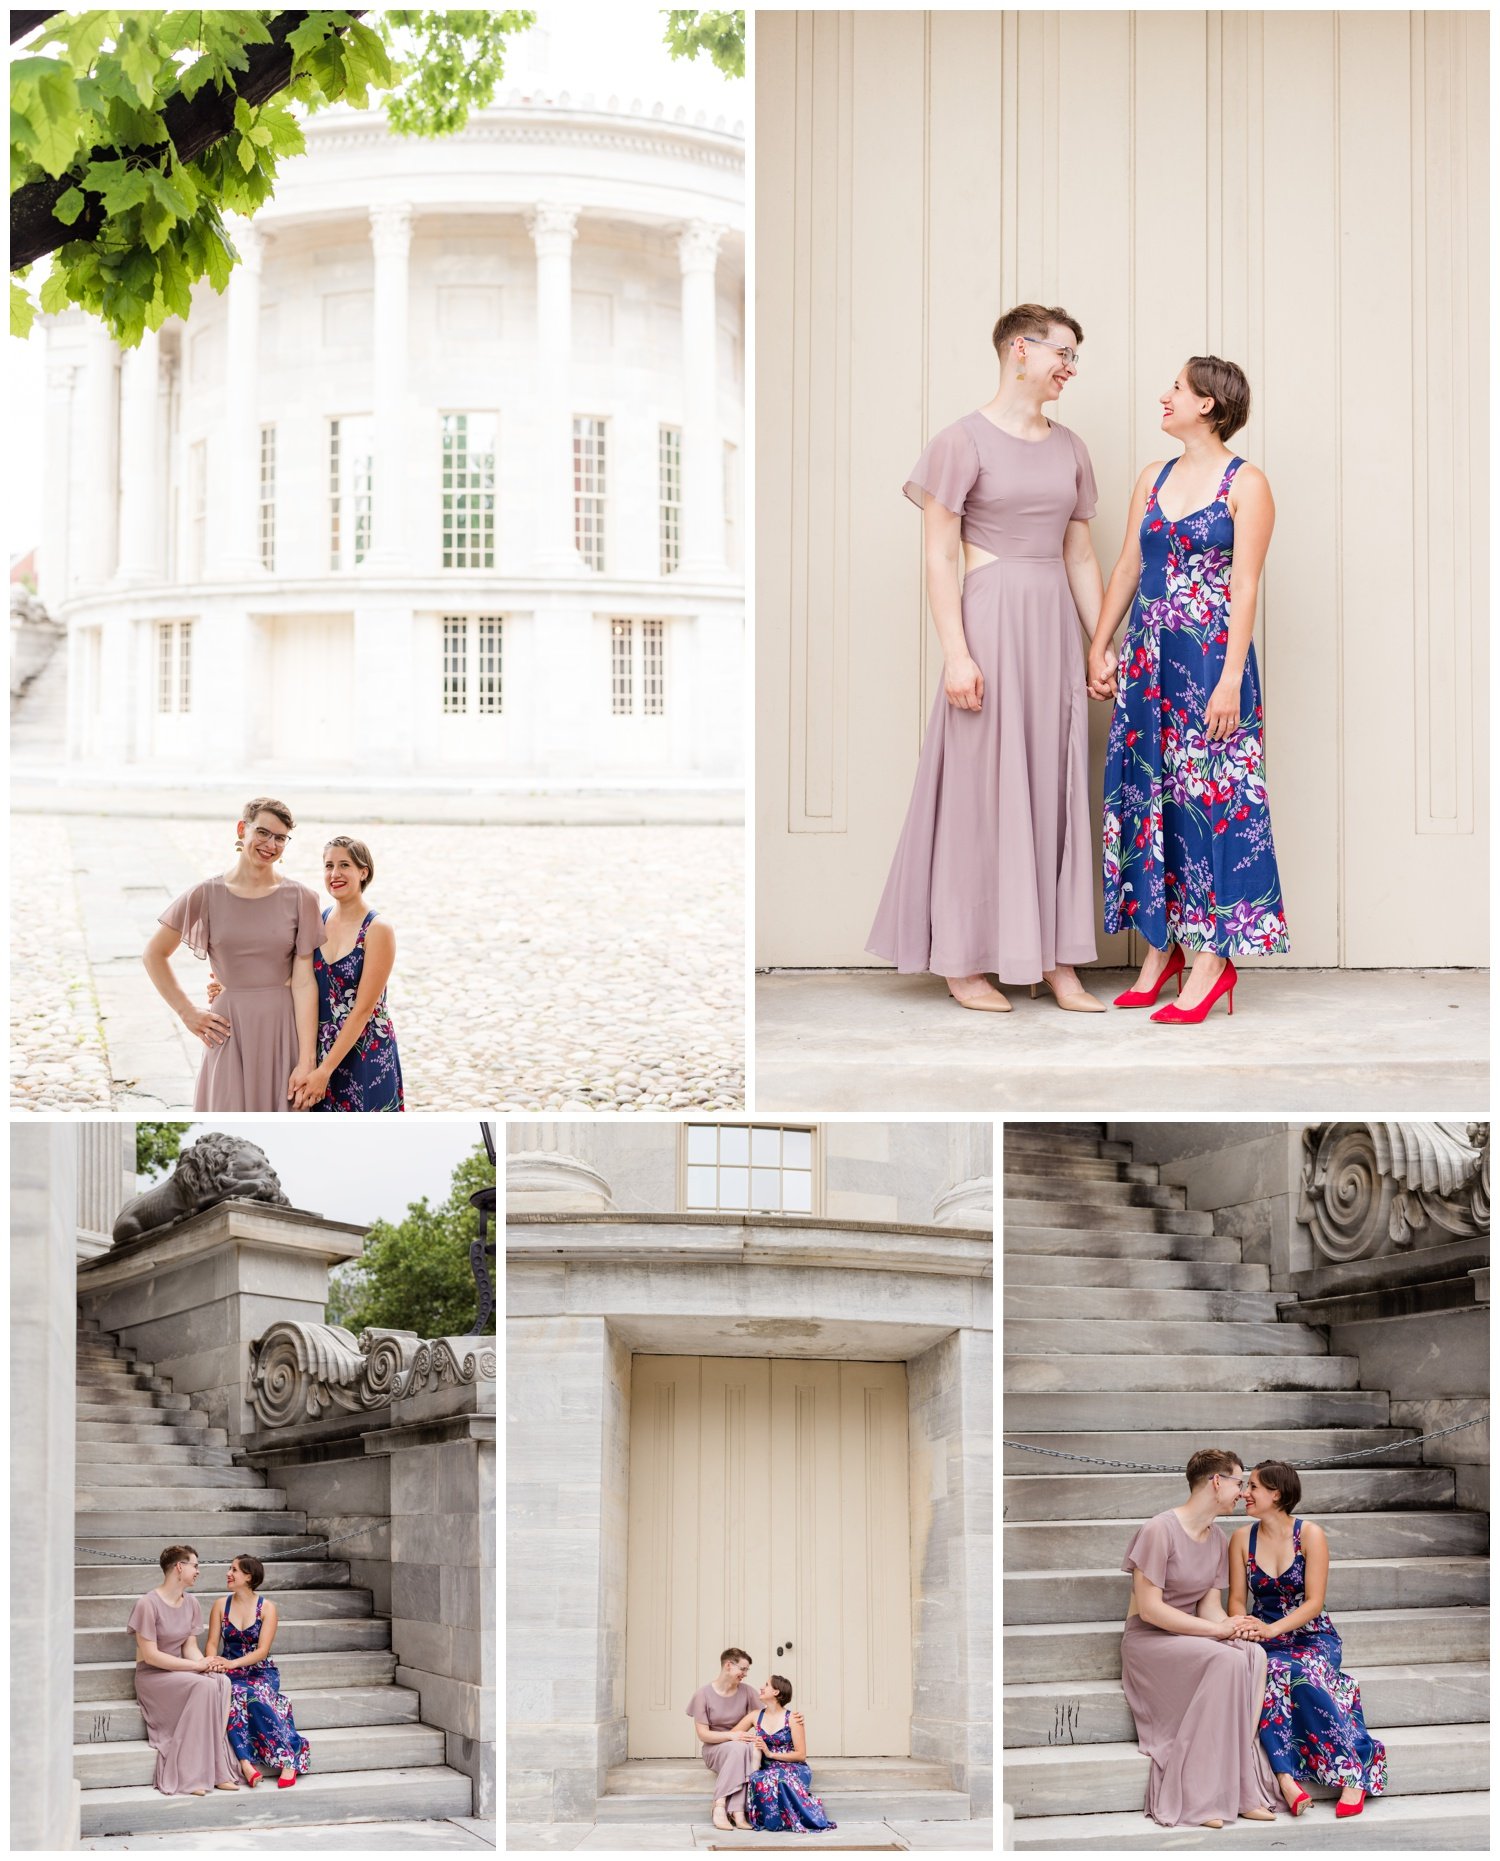 Lesbian-Old-City-Philly-Engagement-Photos-by-LGBTQ-Photographer-3